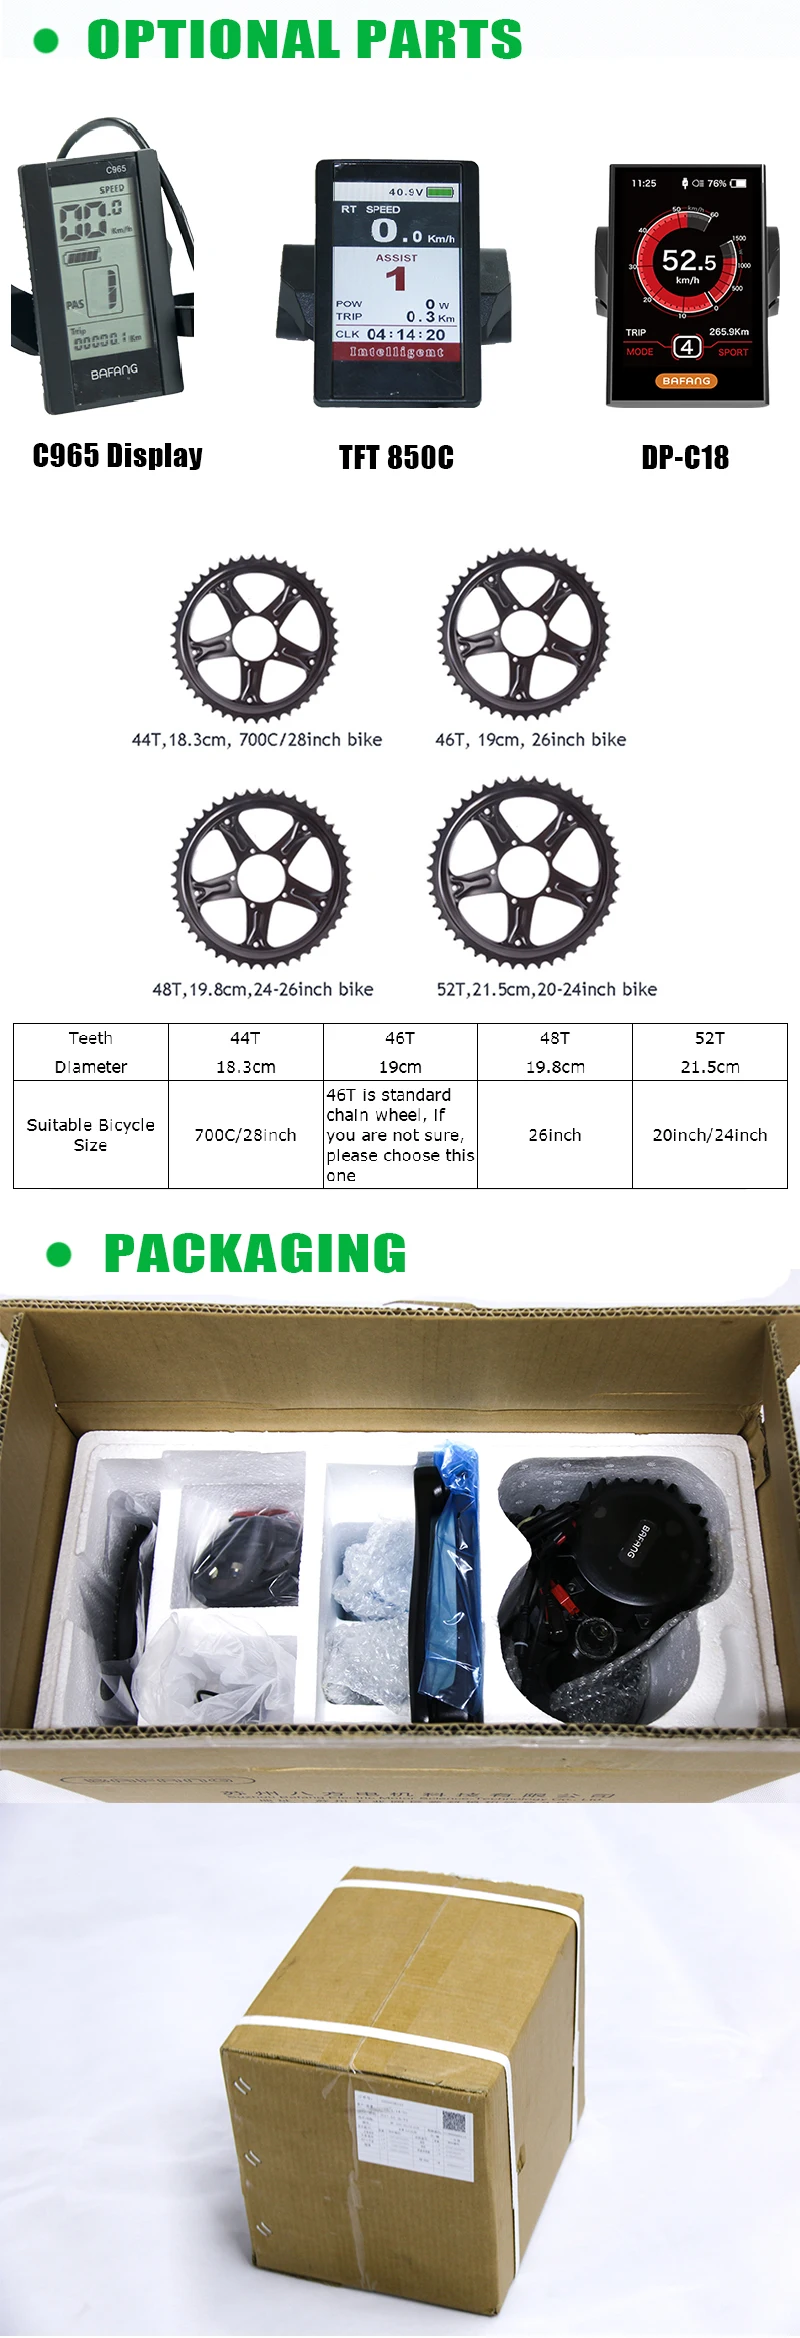 Discount Bafang BBS02 500W E Bike Kit 48V 500W Mid Drive Bafang Motor DIY with 13AH Lithium Ebike Battery Electric Bike Kit with Battery 6